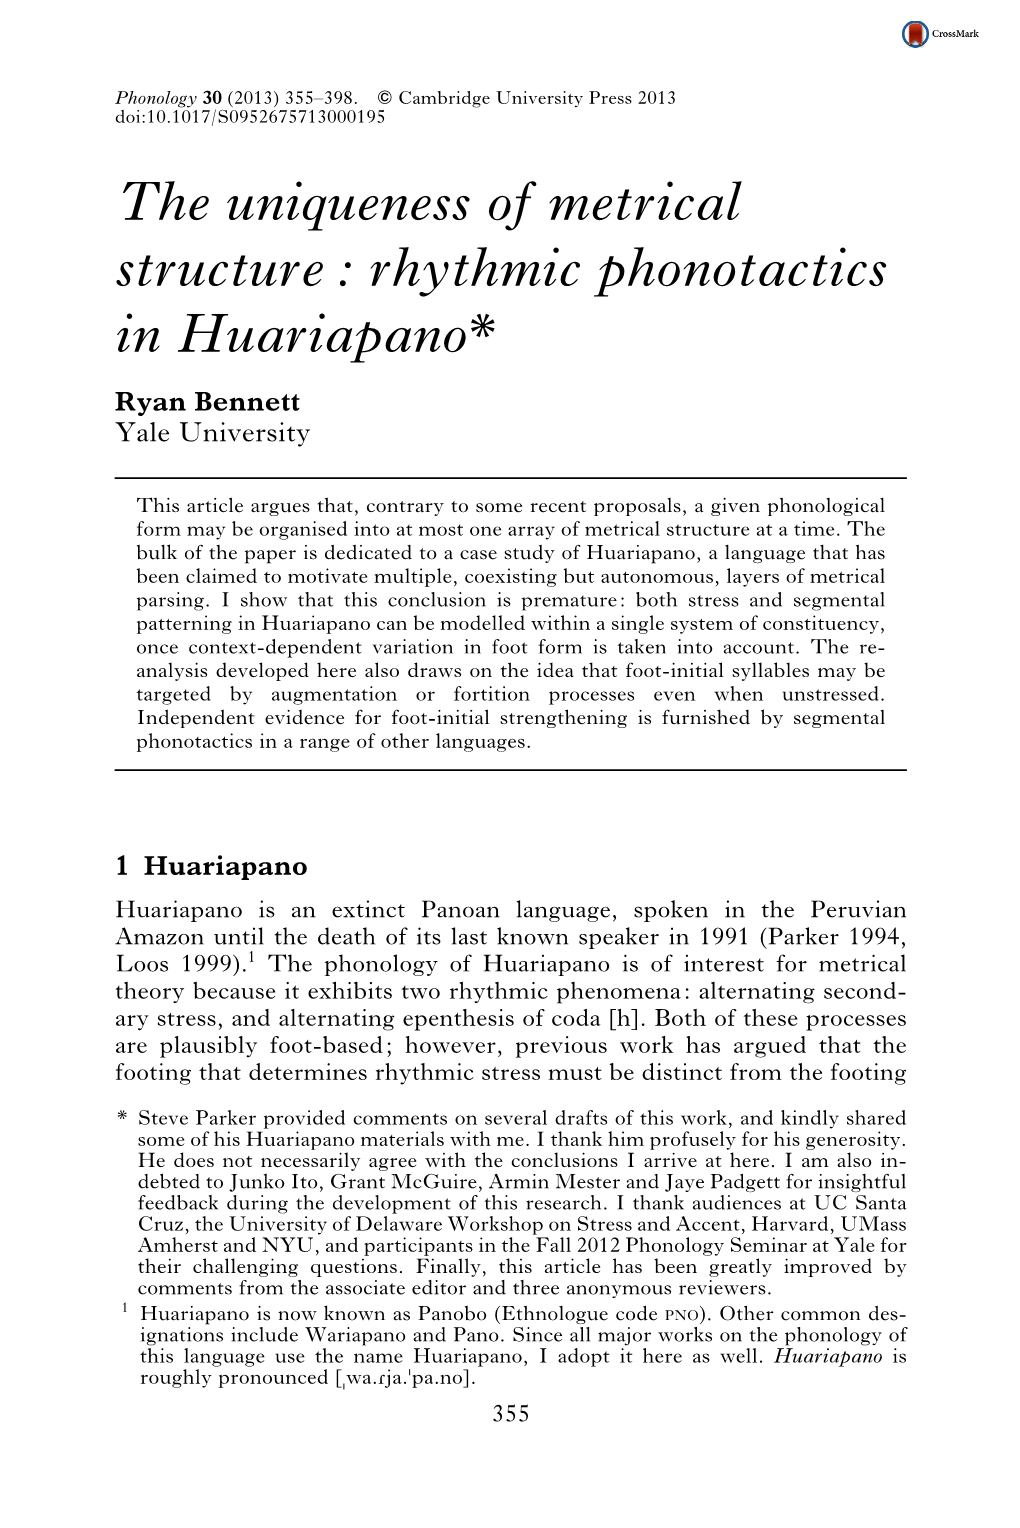 The Uniqueness of Metrical Structure: Rhythmic Phonotactics in Huariapano* Ryan Bennett Yale University